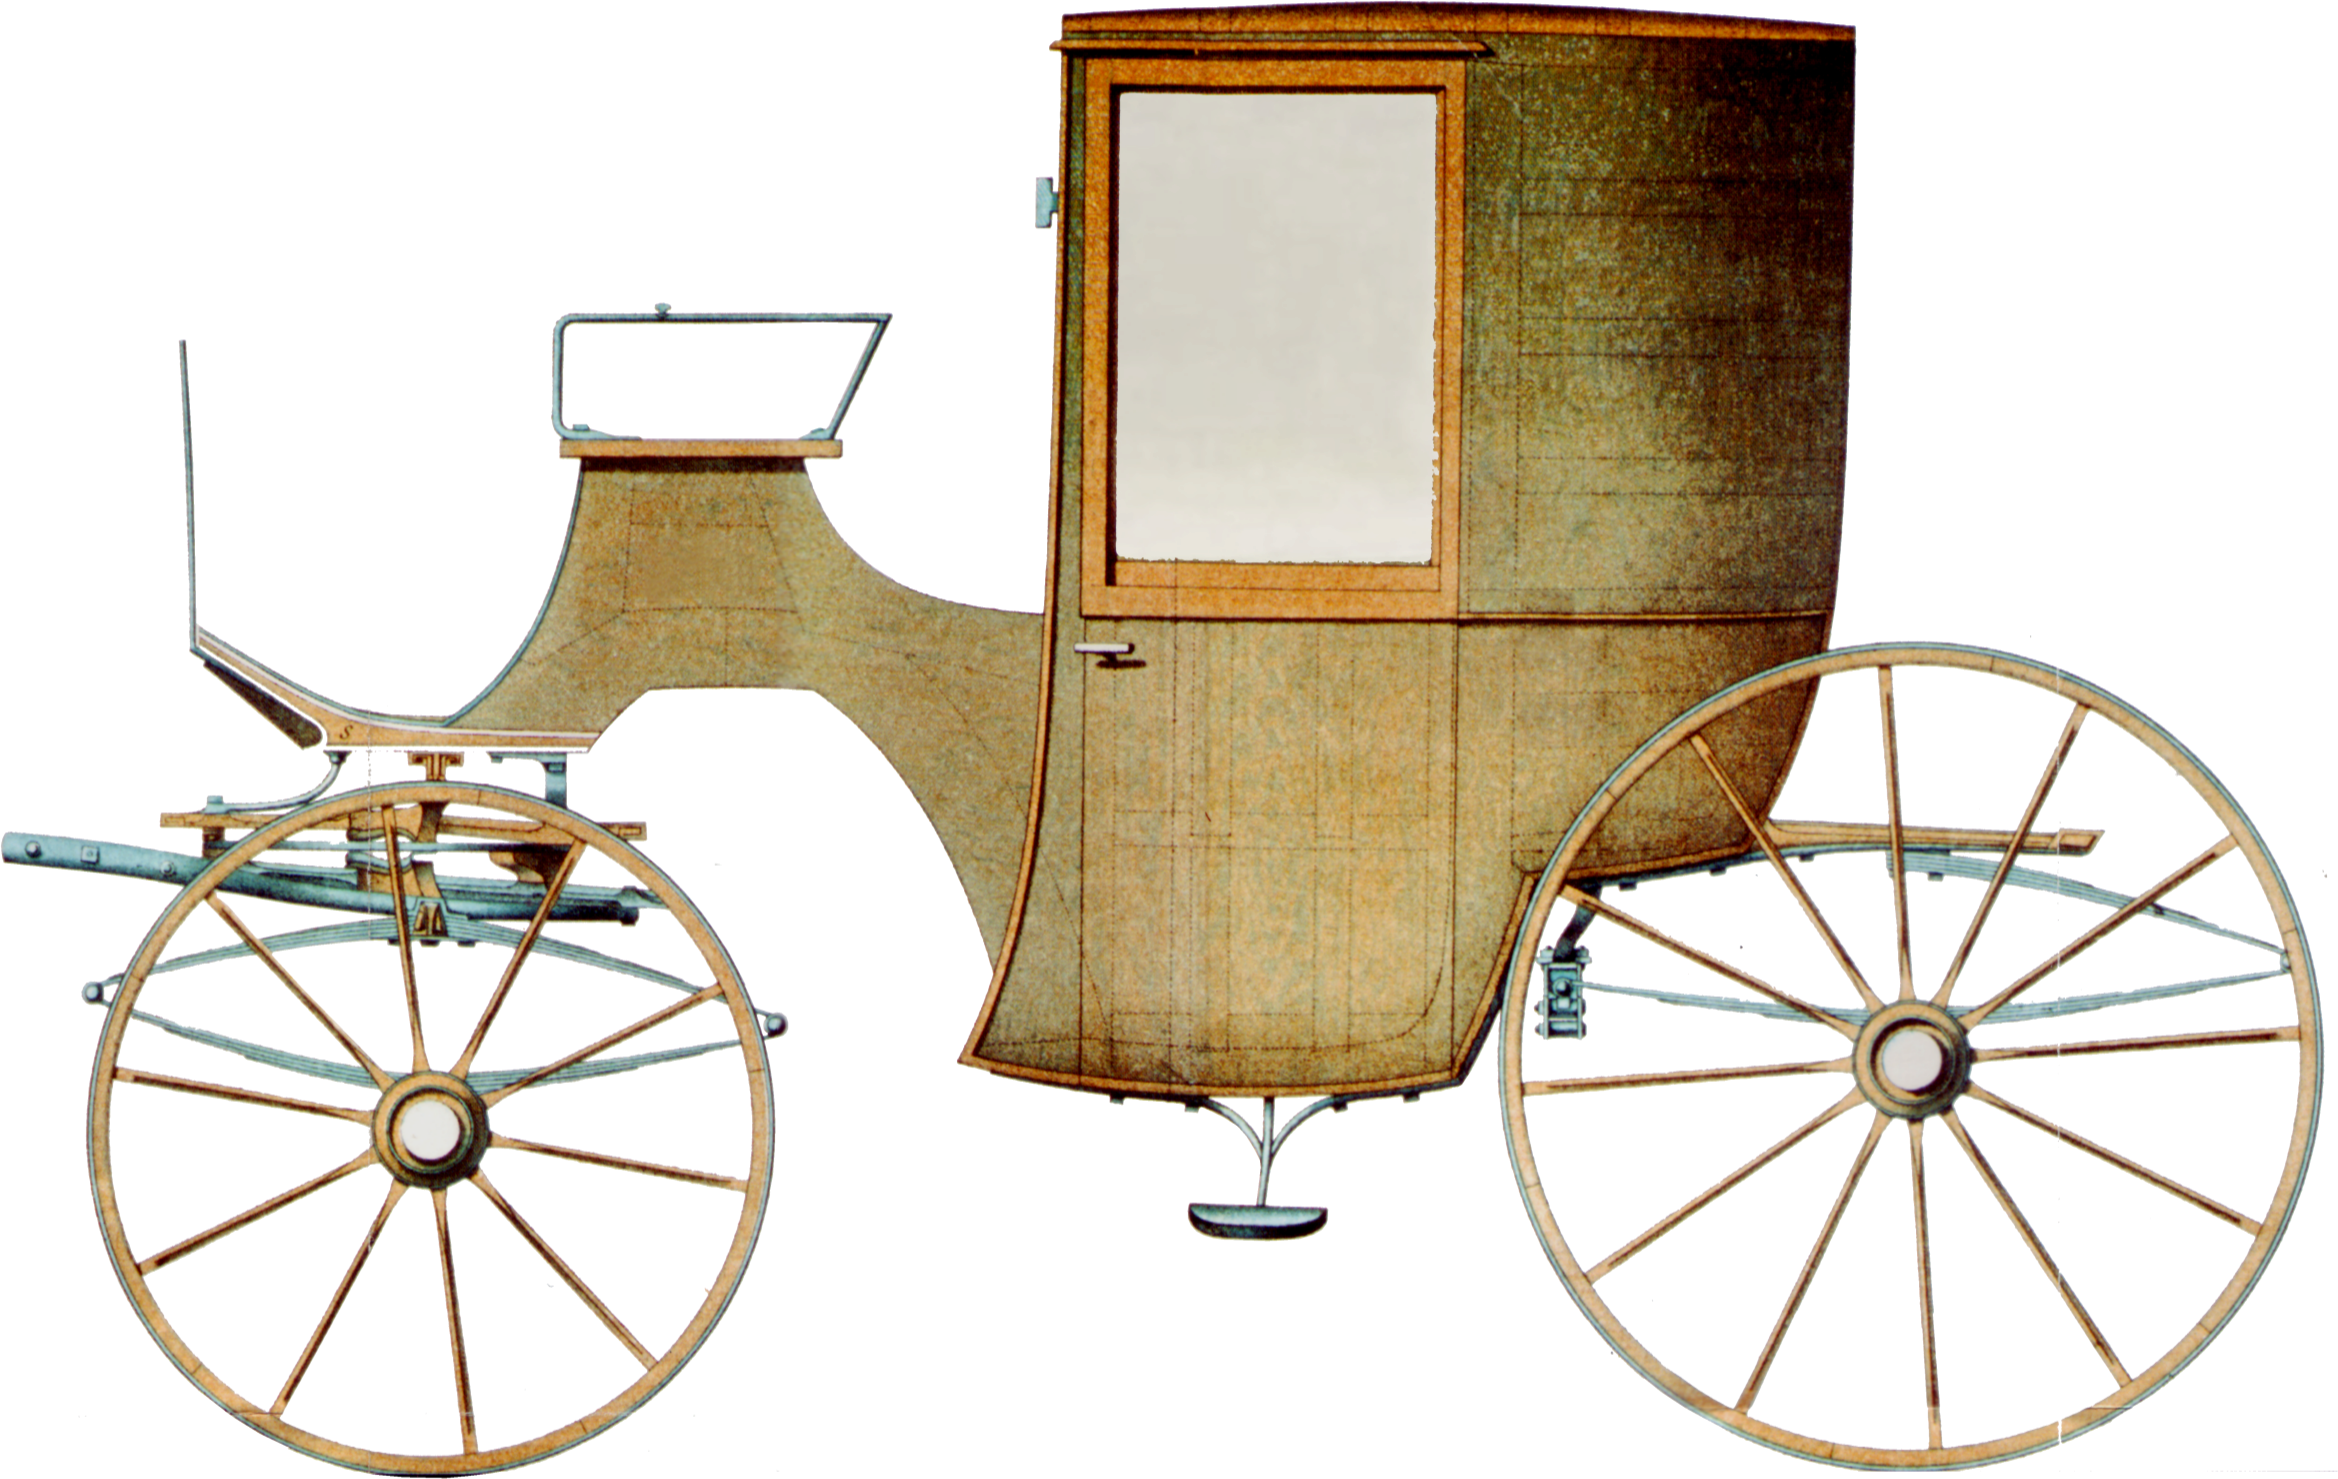 Le chariot